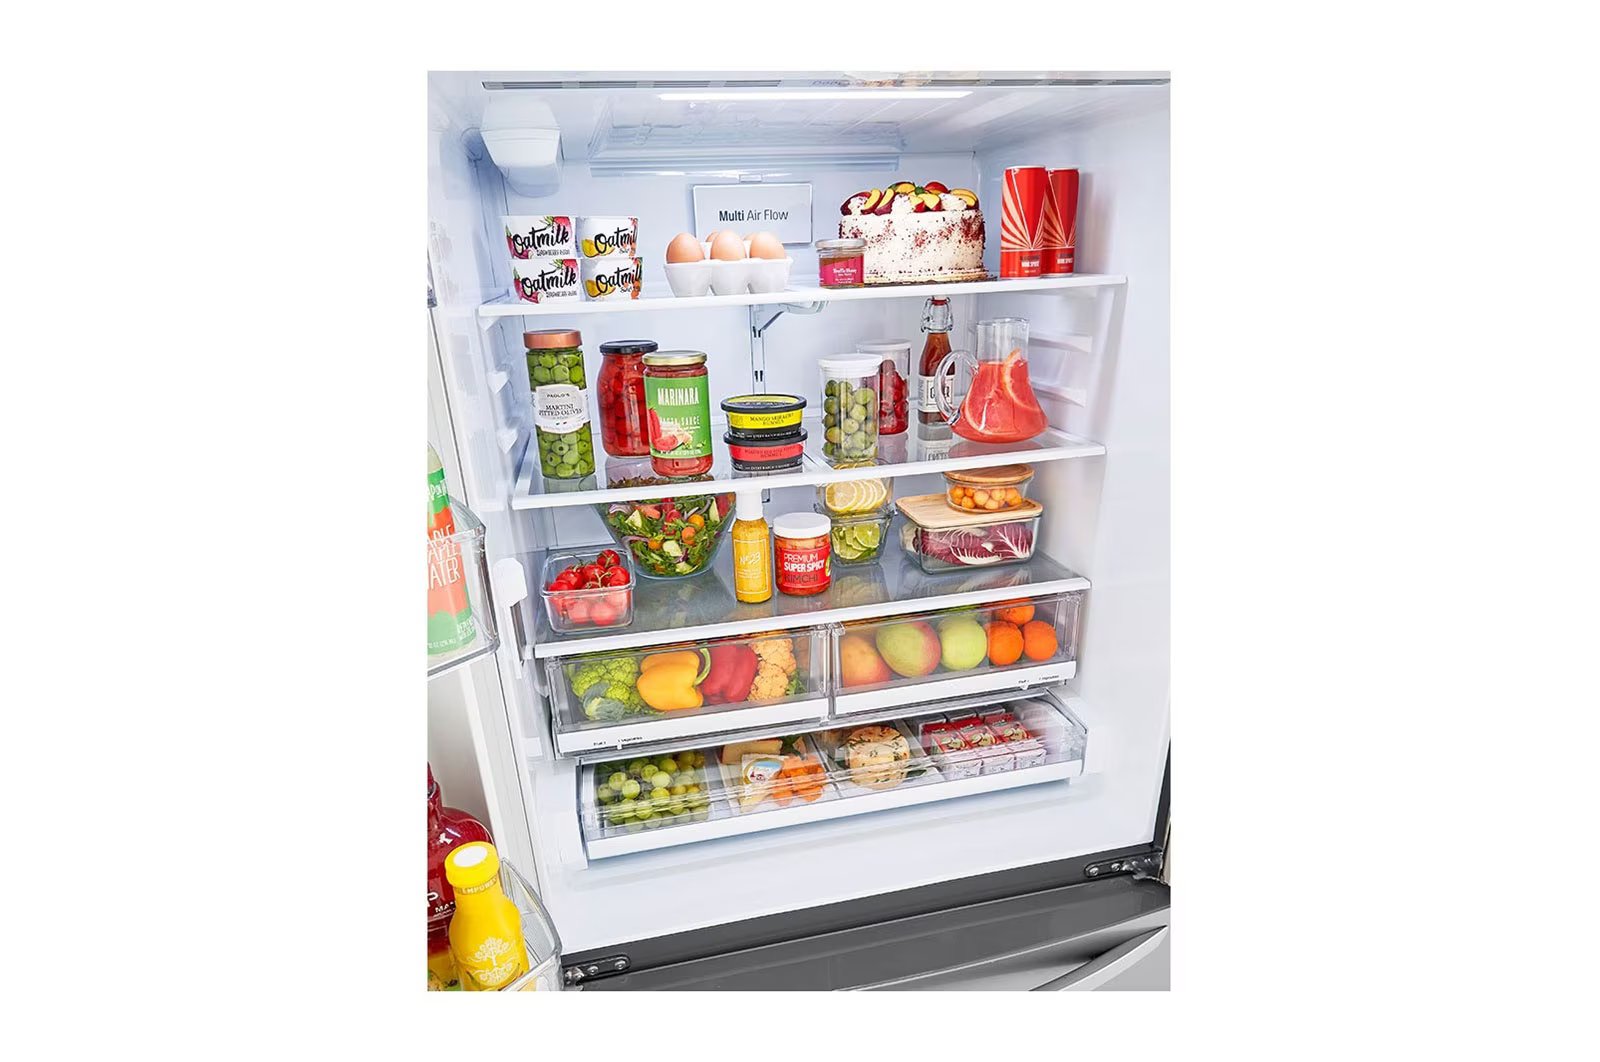 LG - 35.75 Inch 22.7 cu. ft French Door Refrigerator in Stainless - LMWC23626S